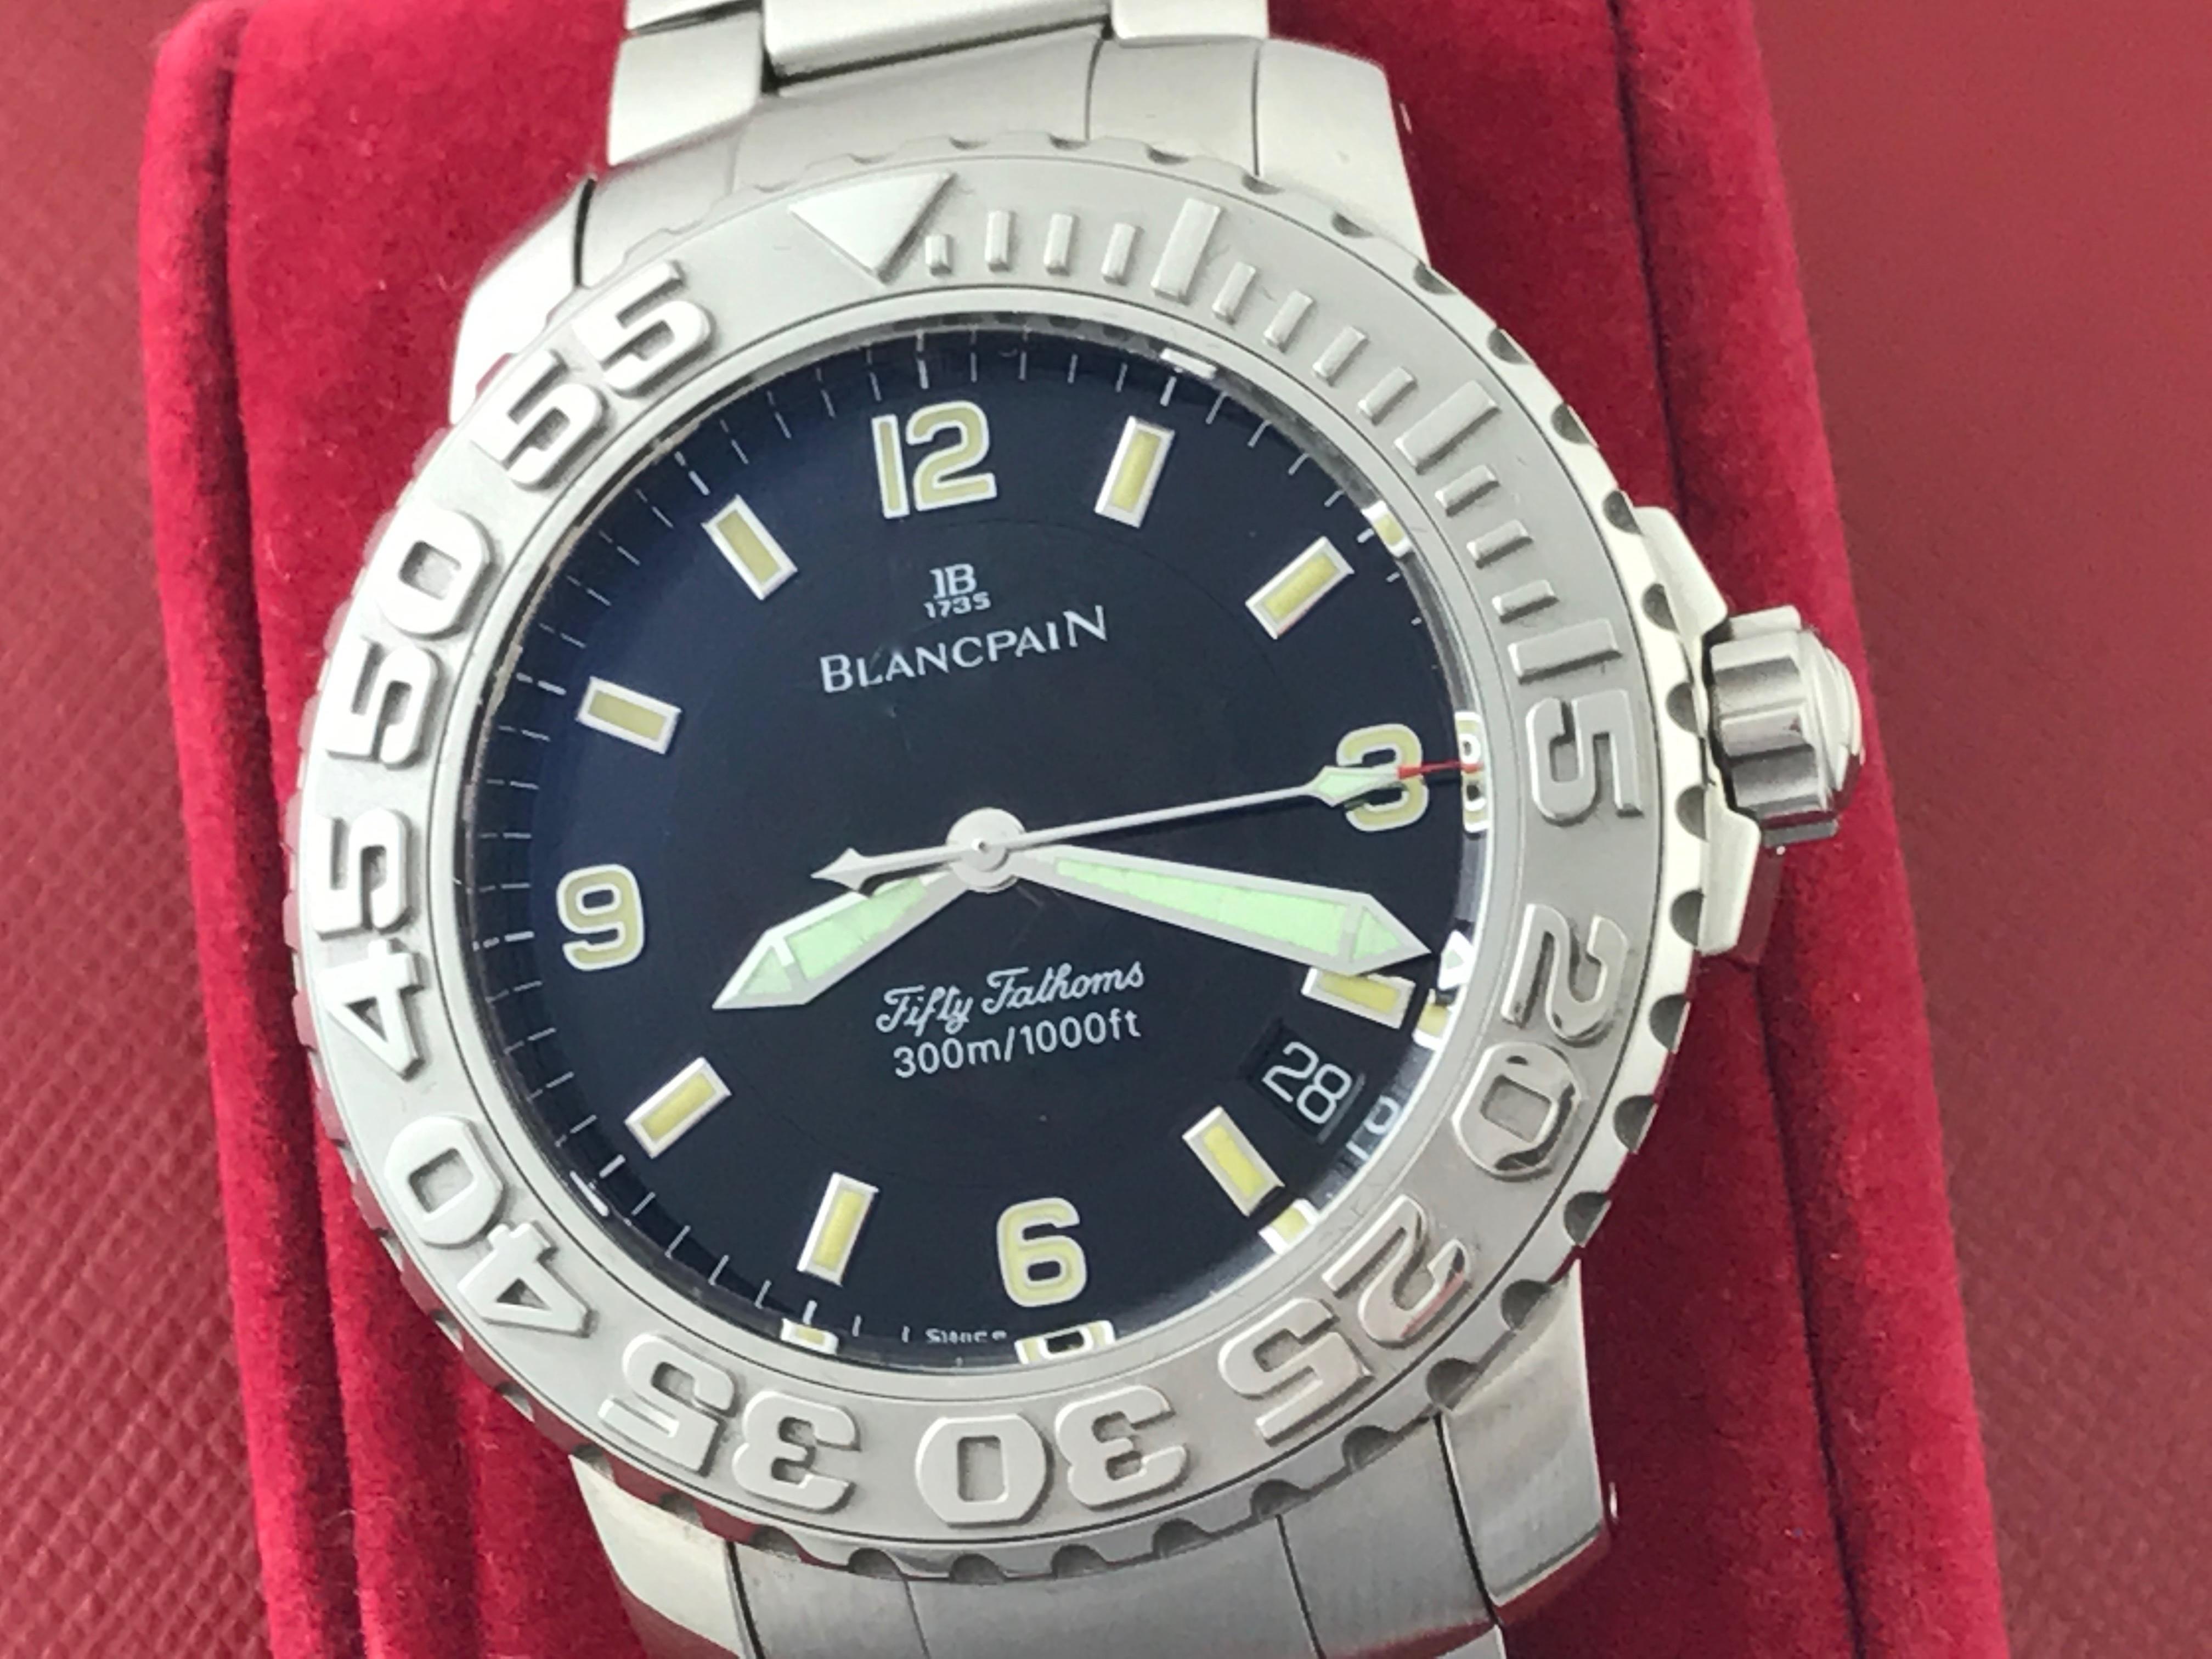 Blancpain Fifty Fathoms, model 2200.1130.71 Mens automatic wristwatch.  Stainless Steel round style case with rotating bezel (40mm dia.). Water Resistant to 300 Meters. Stainless steel Blancpain bracelet with deployant clasp. Black Dial with